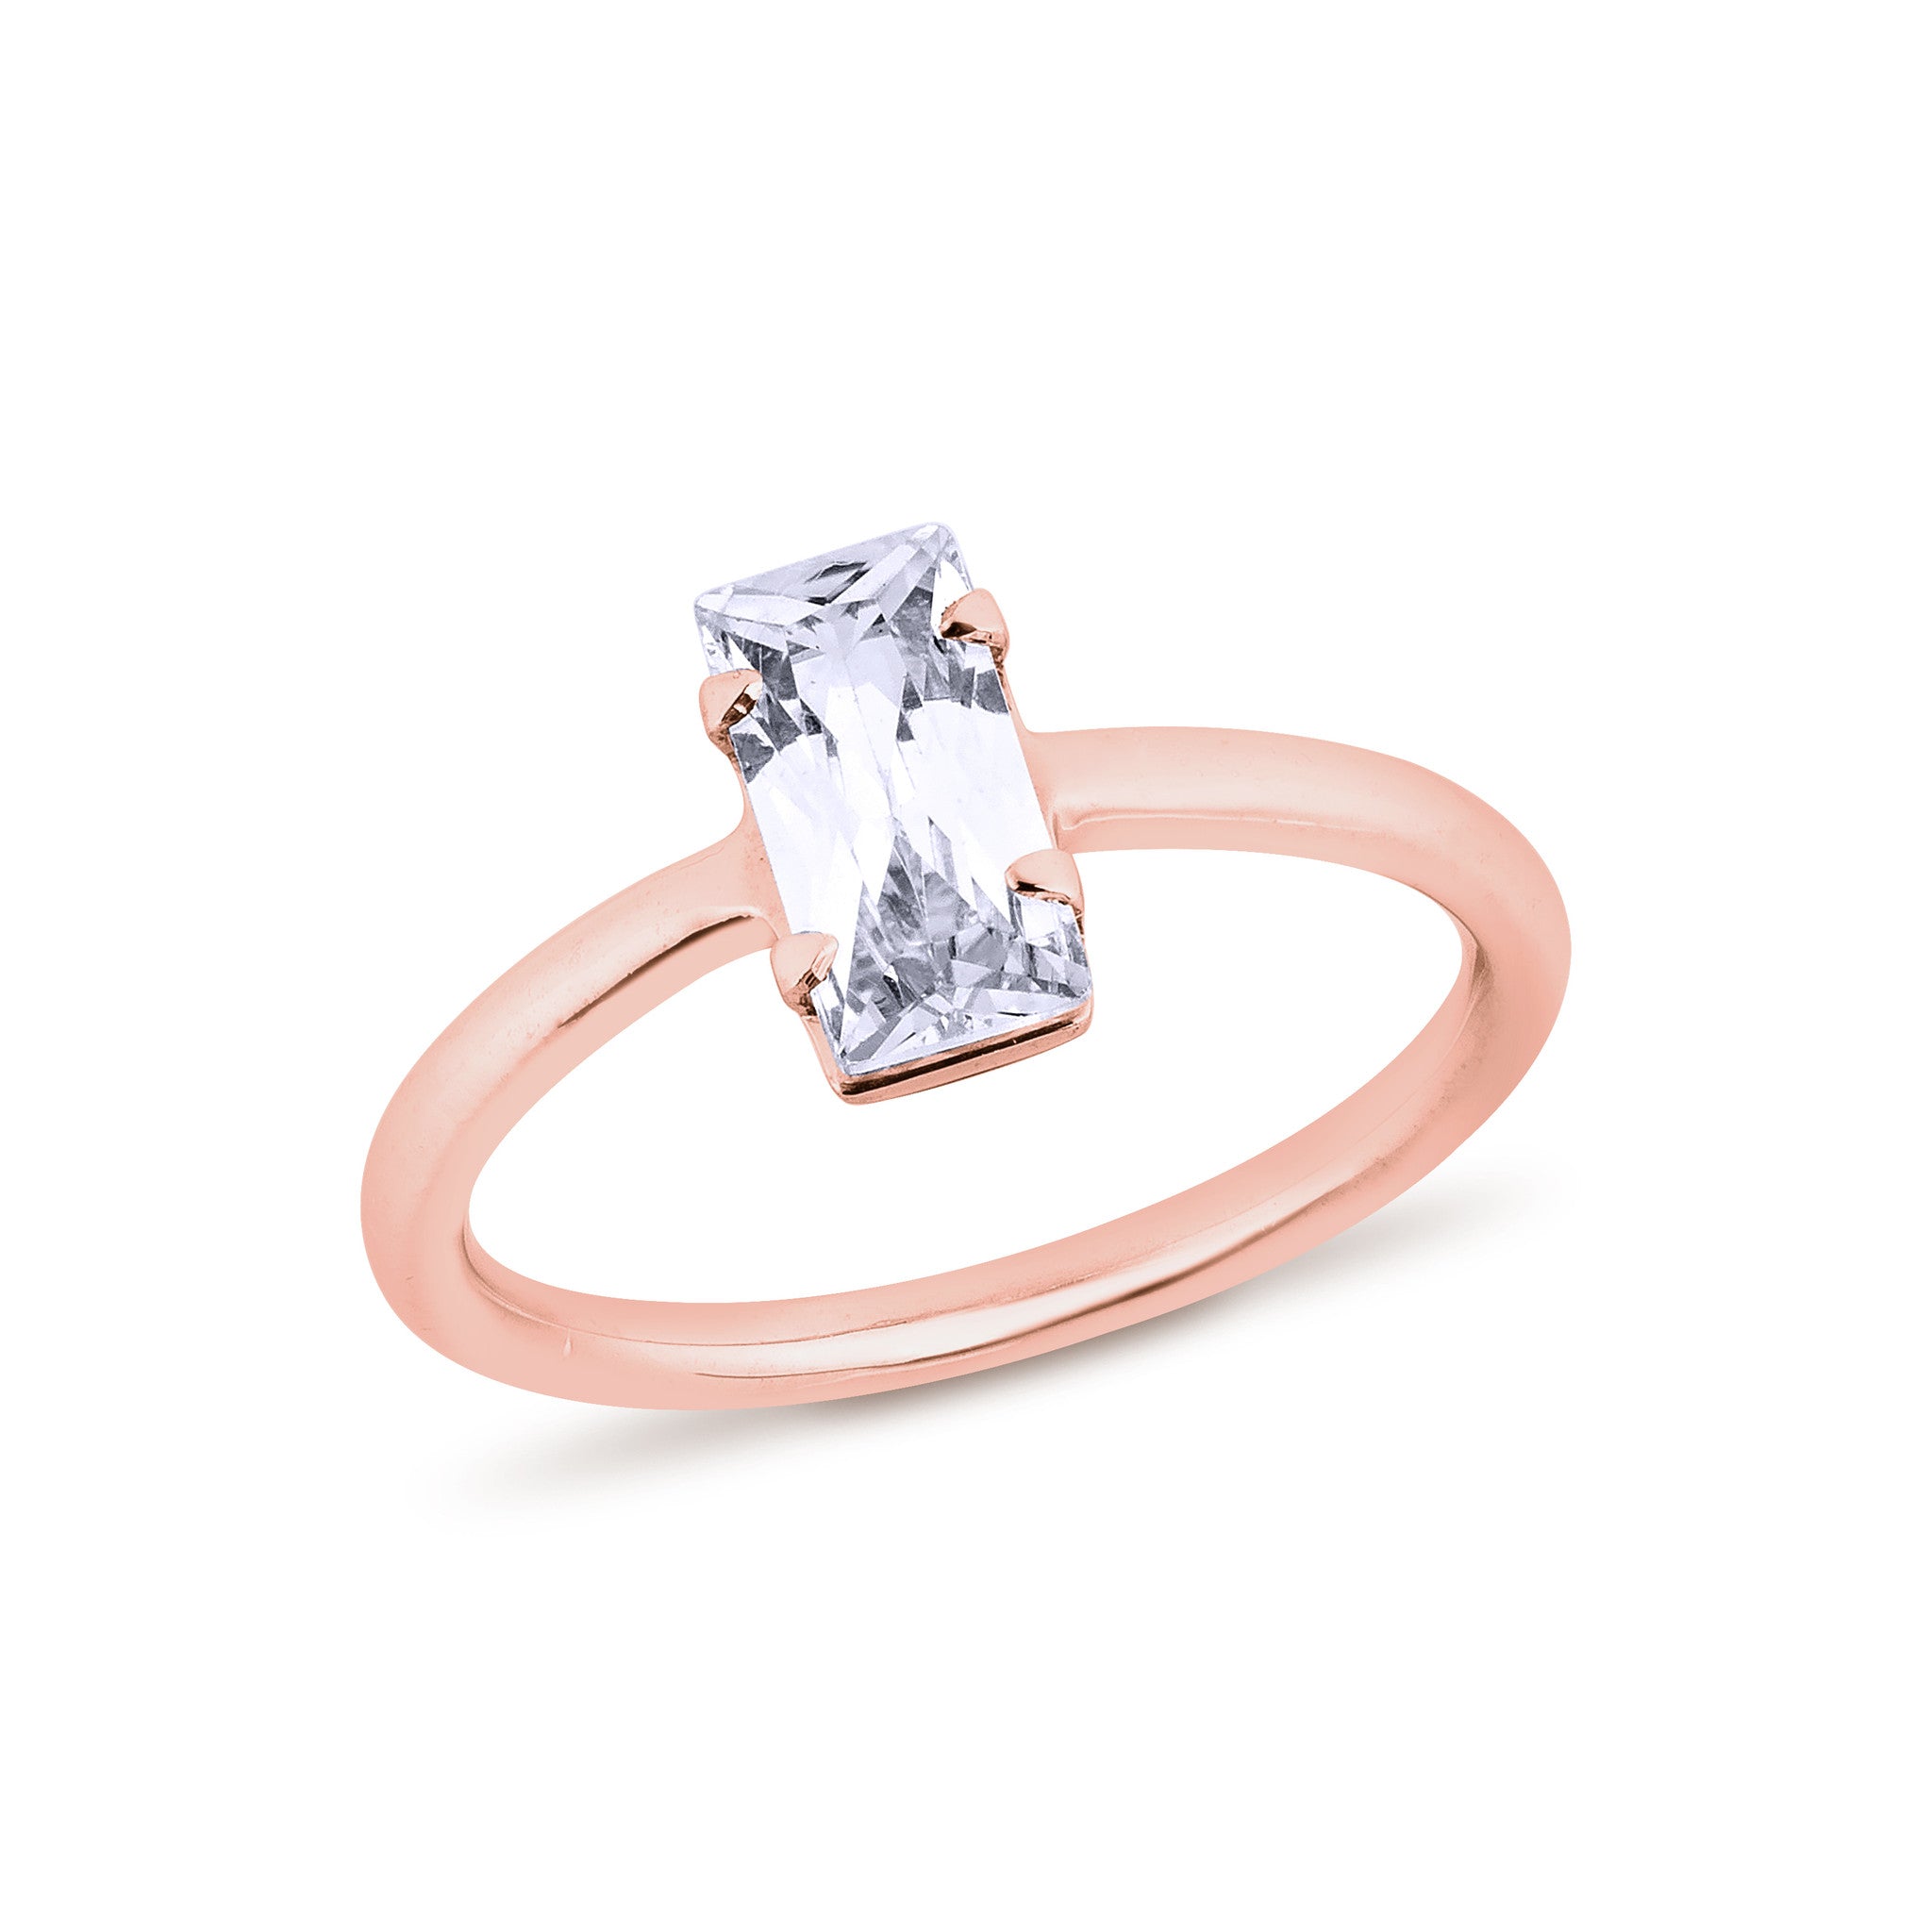 Baguettes Diamond Ring - Pinkgold - Haus of Jewelry